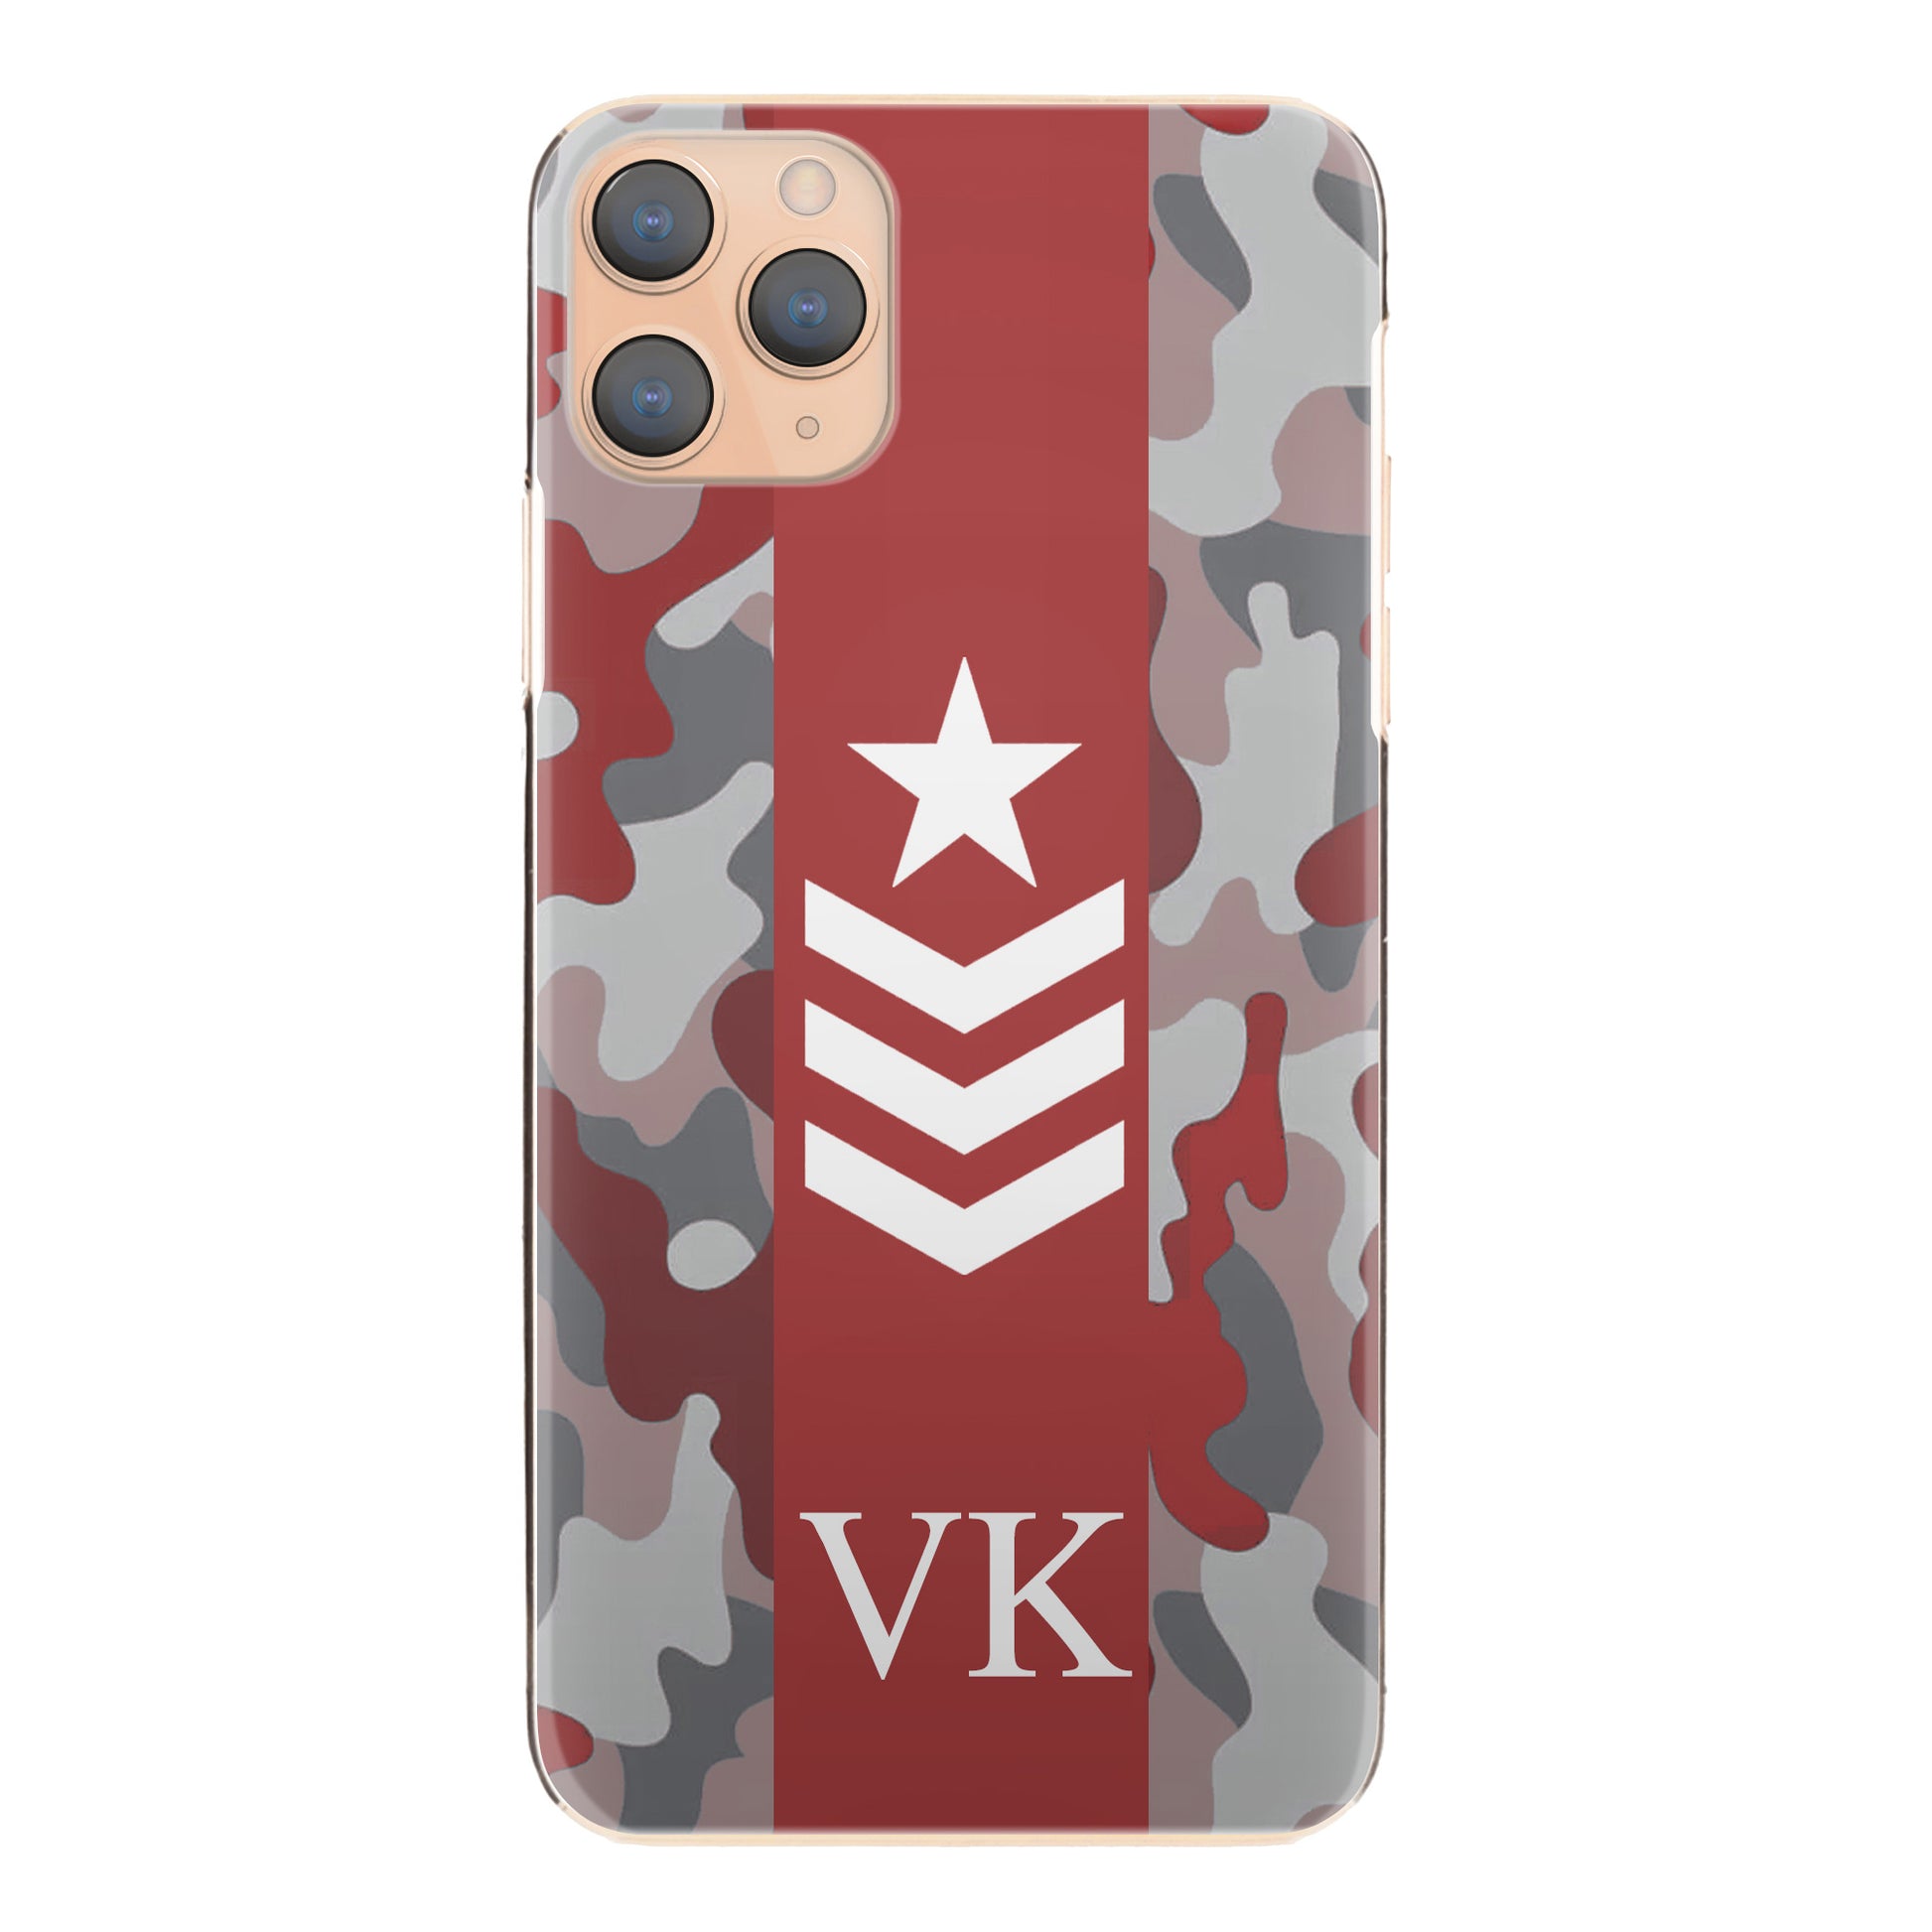 Personalised Sony Phone Hard Case with Initials and Army Rank on Red Camo